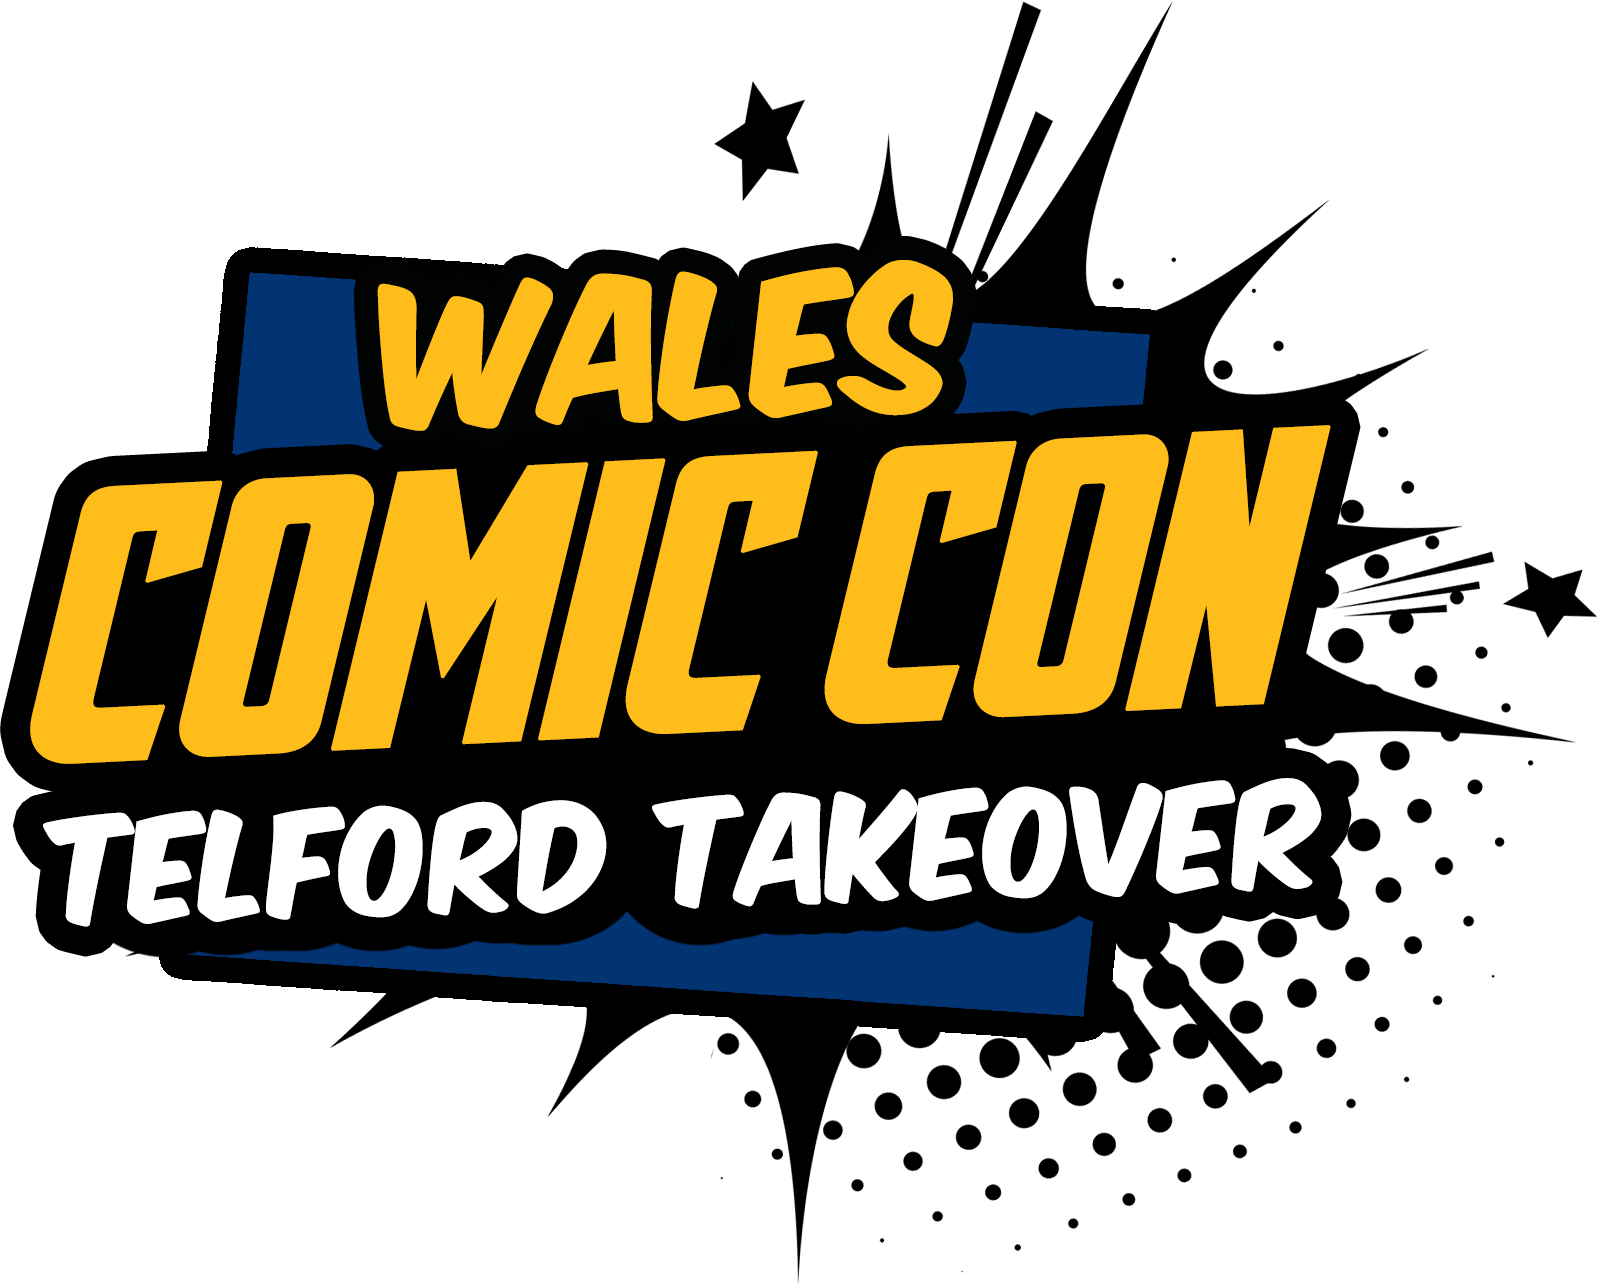 Wales Comic Con: Telford Takeover